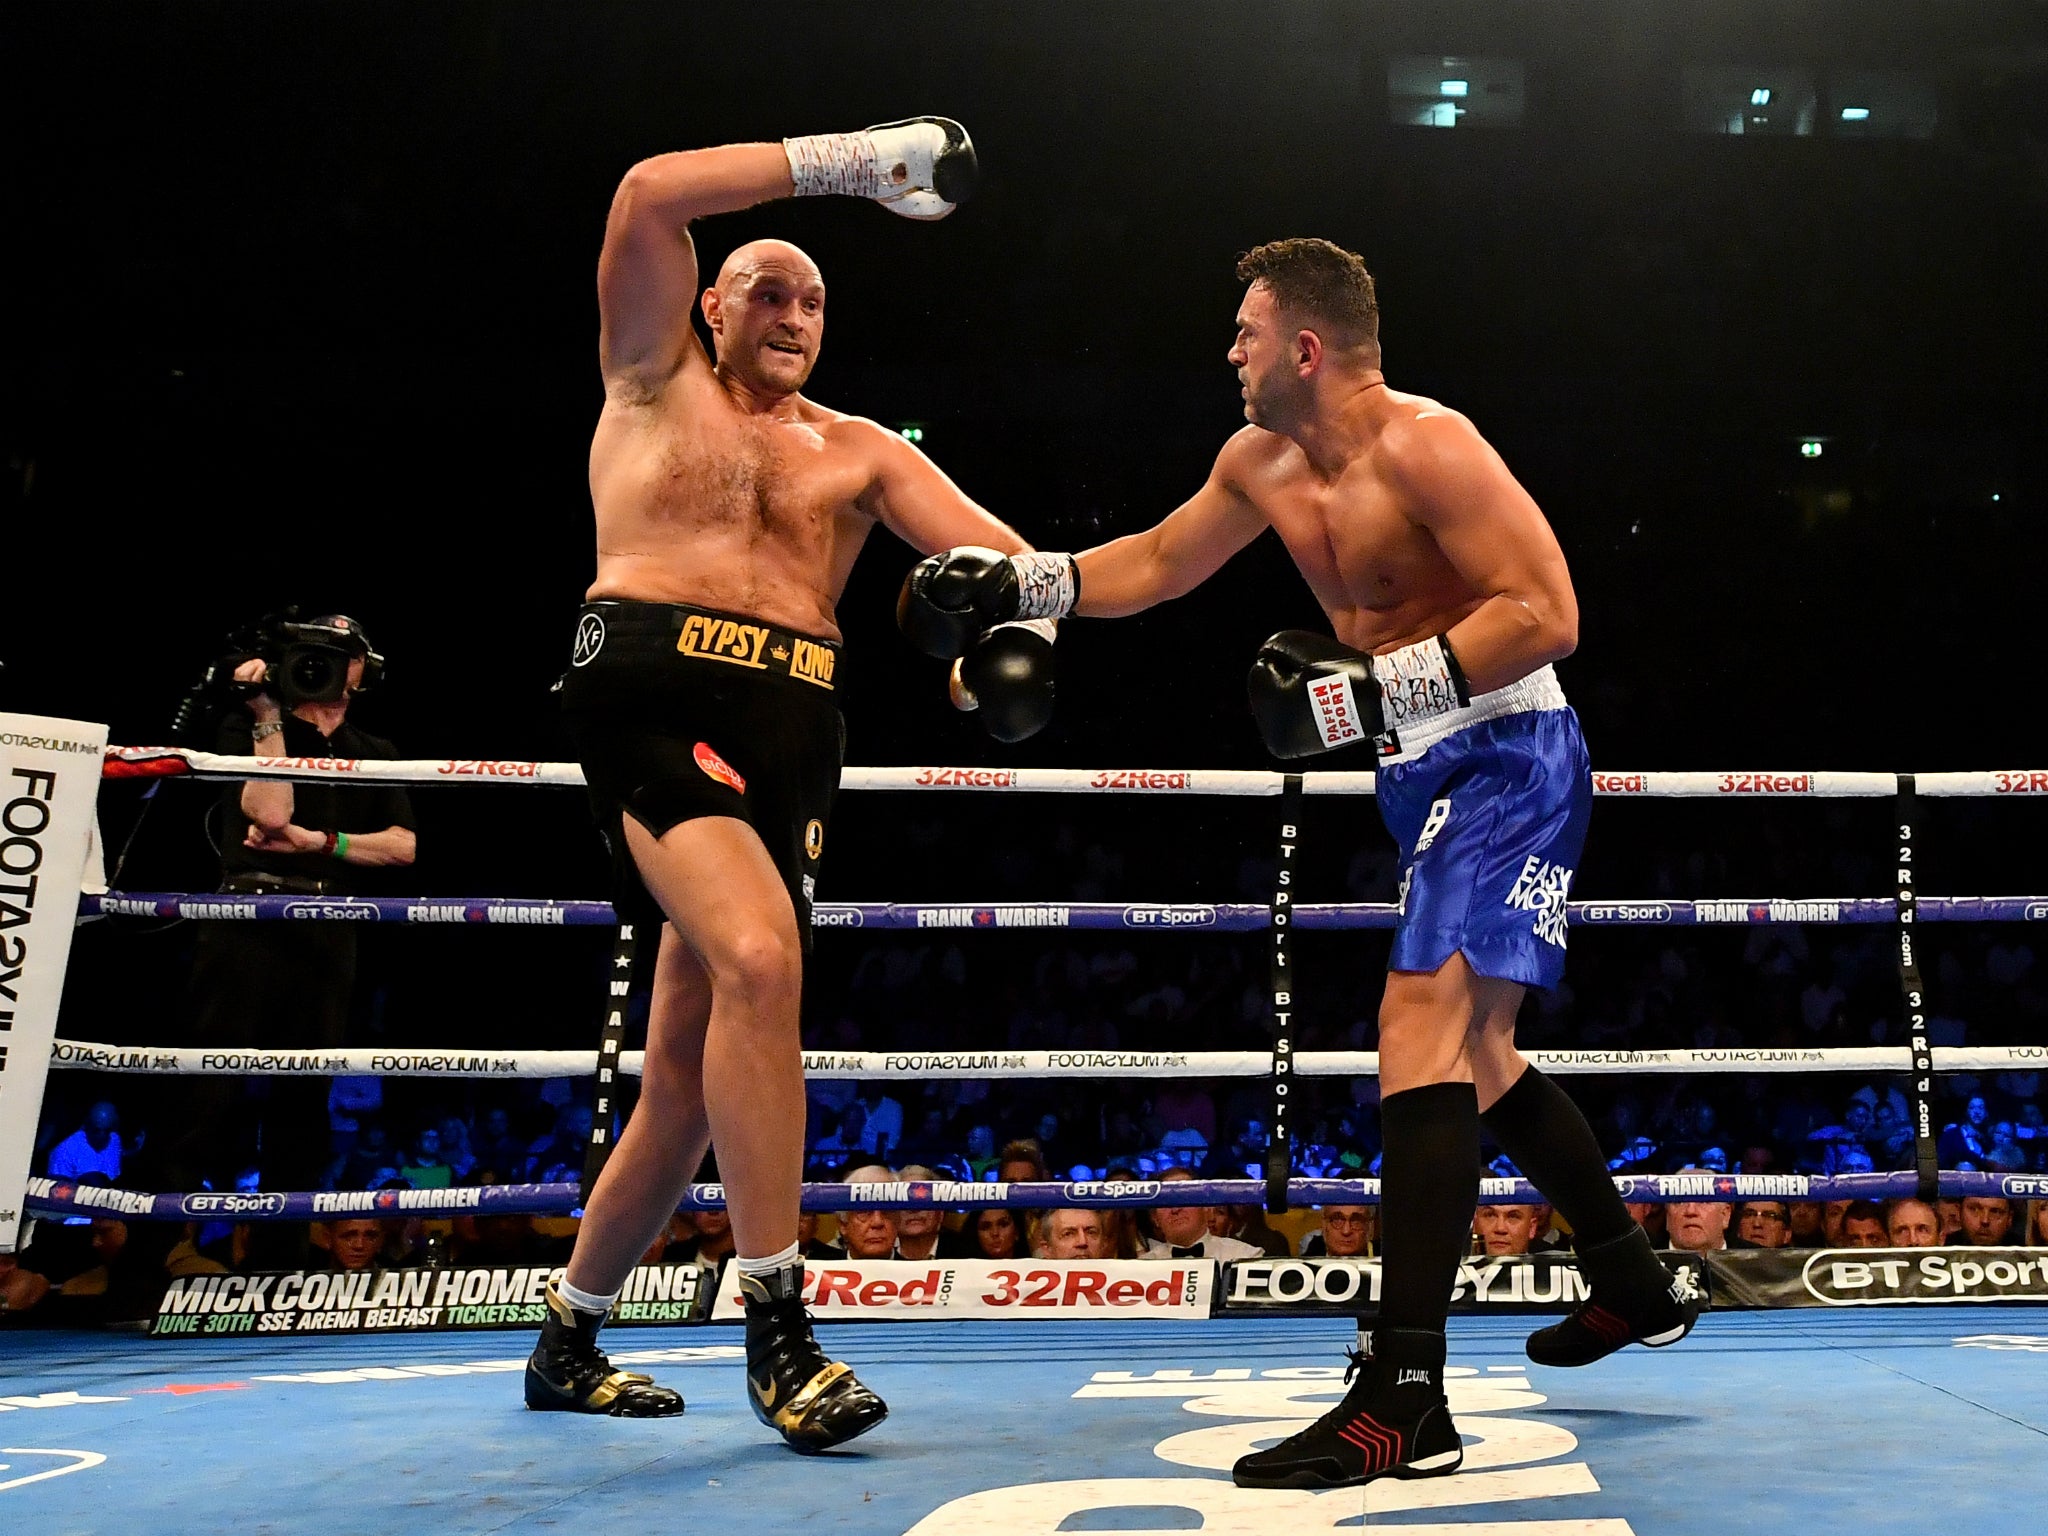 The fight was Fury’s first since beating Wladimir Klitschko in 2015